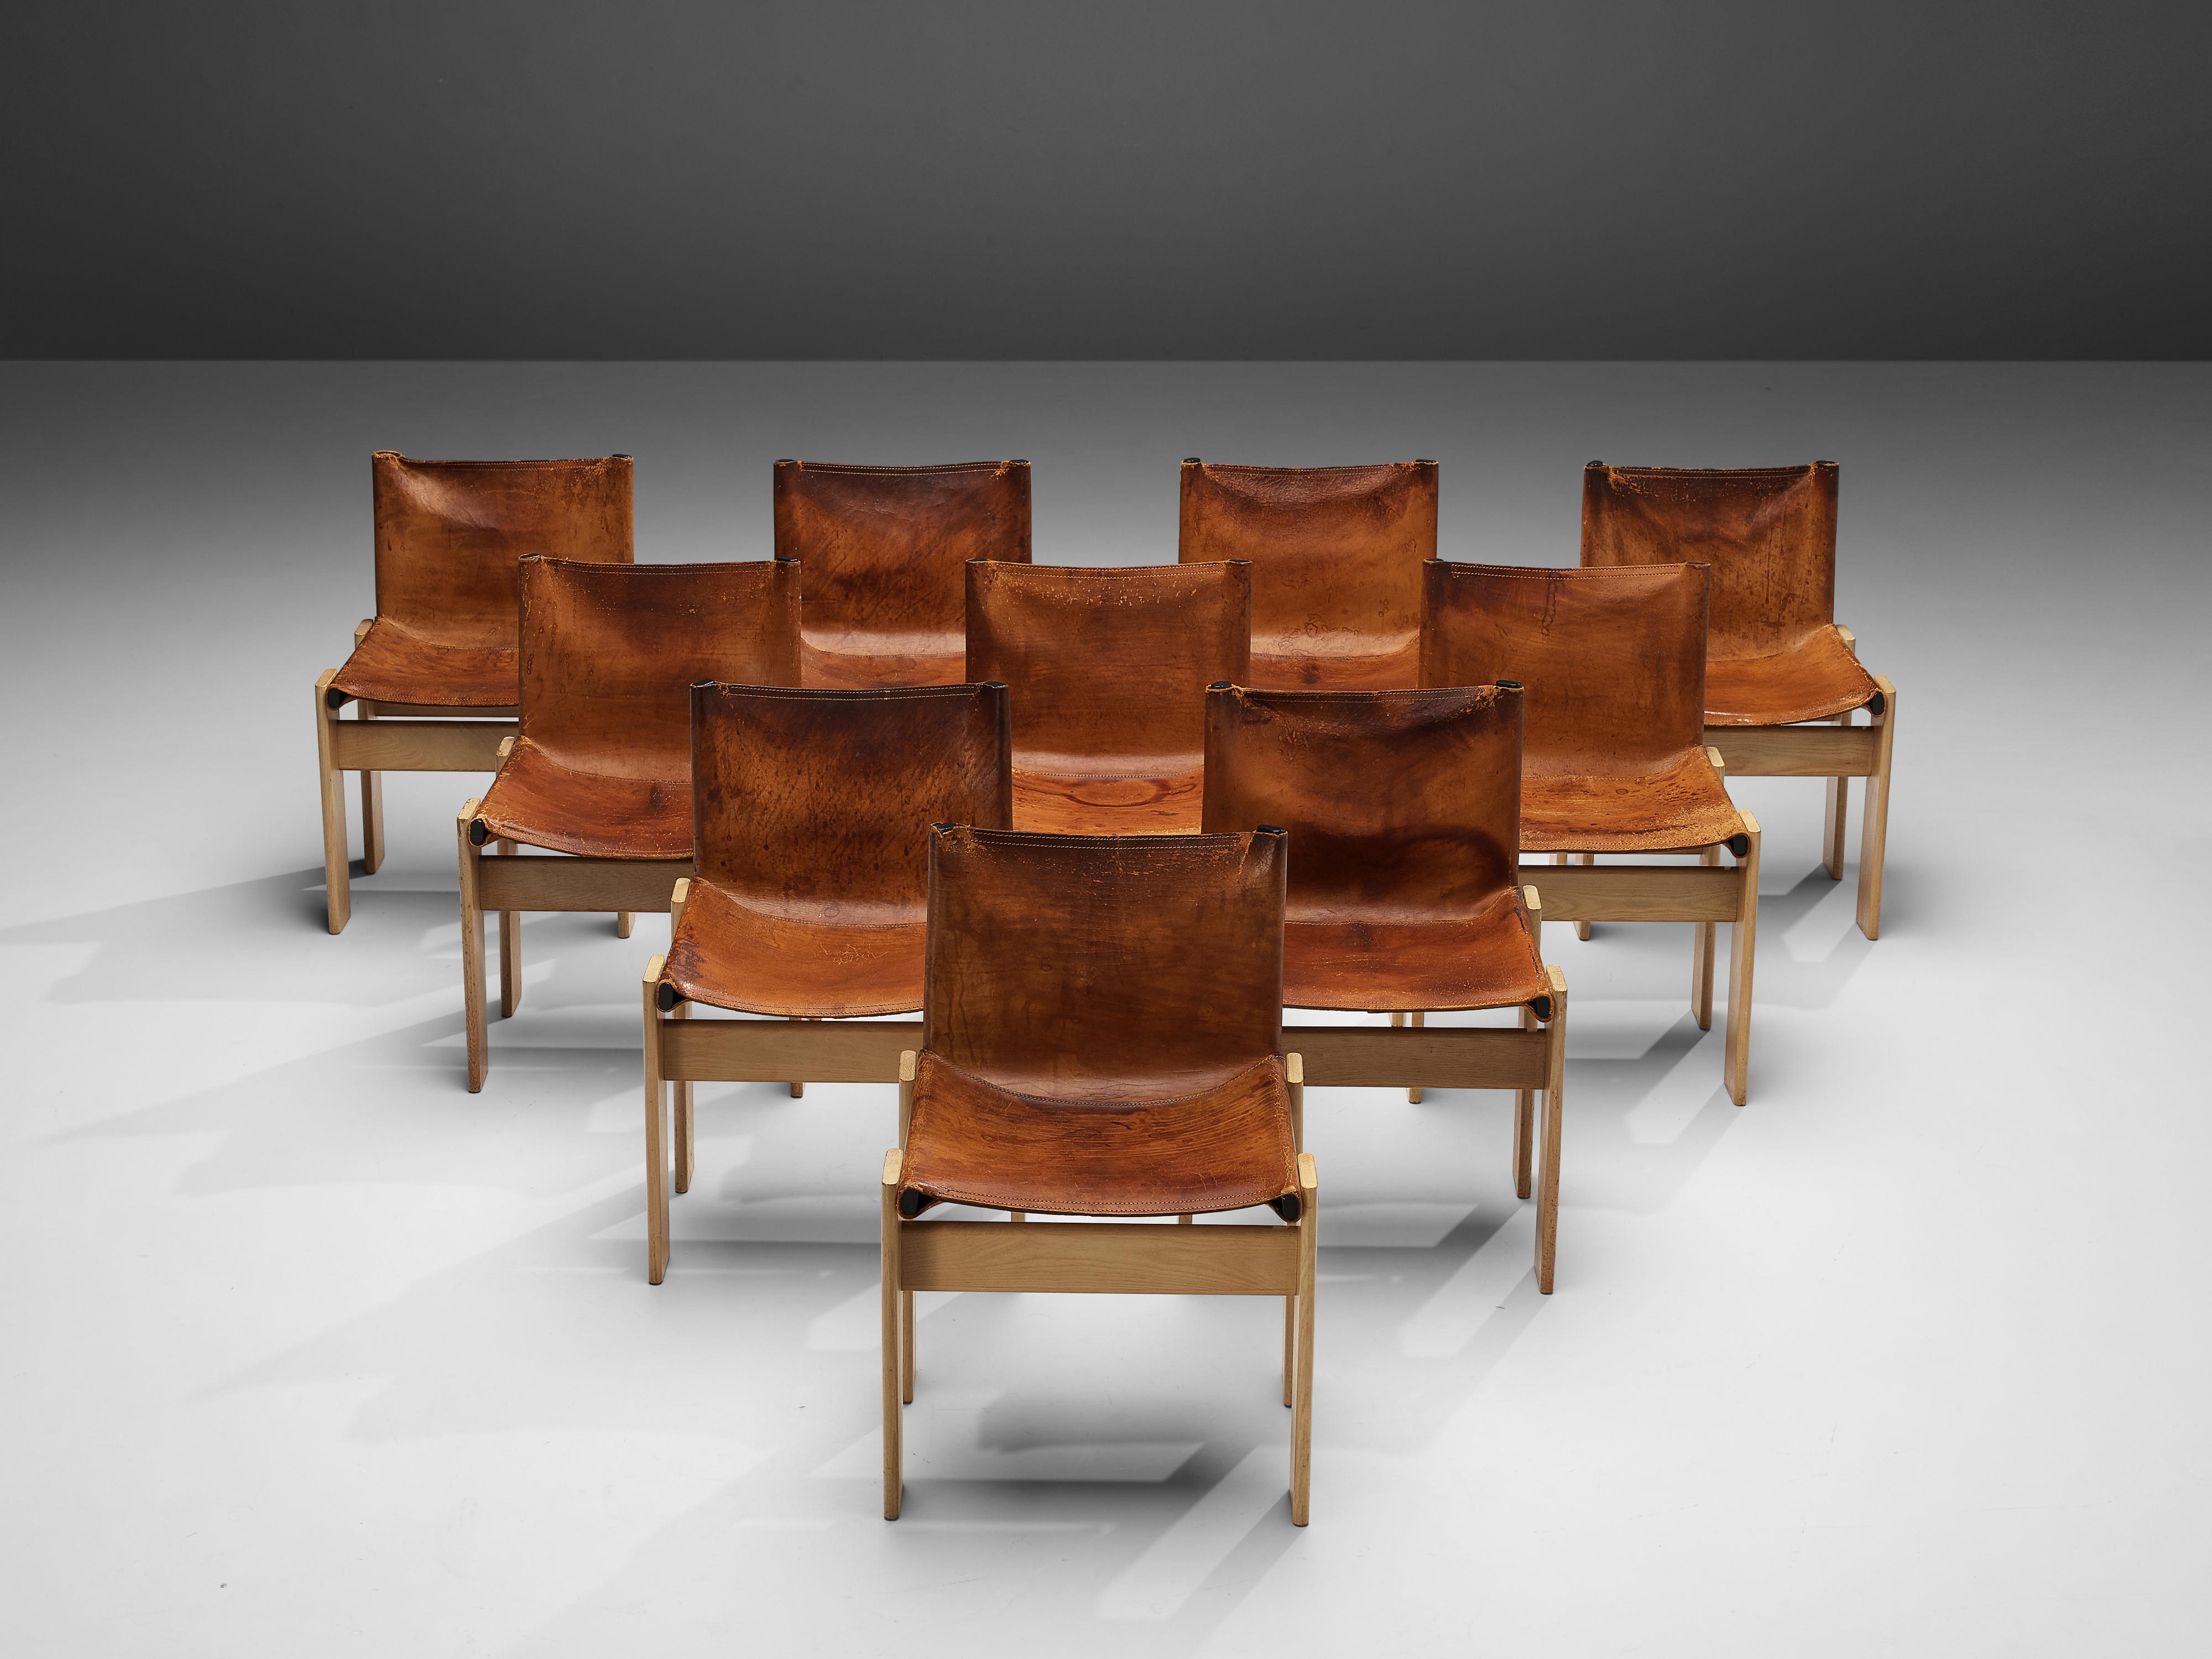 Italian Afra & Tobia Scarpa for Molteni Set of 10 Monk Chairs in Cognac Leather